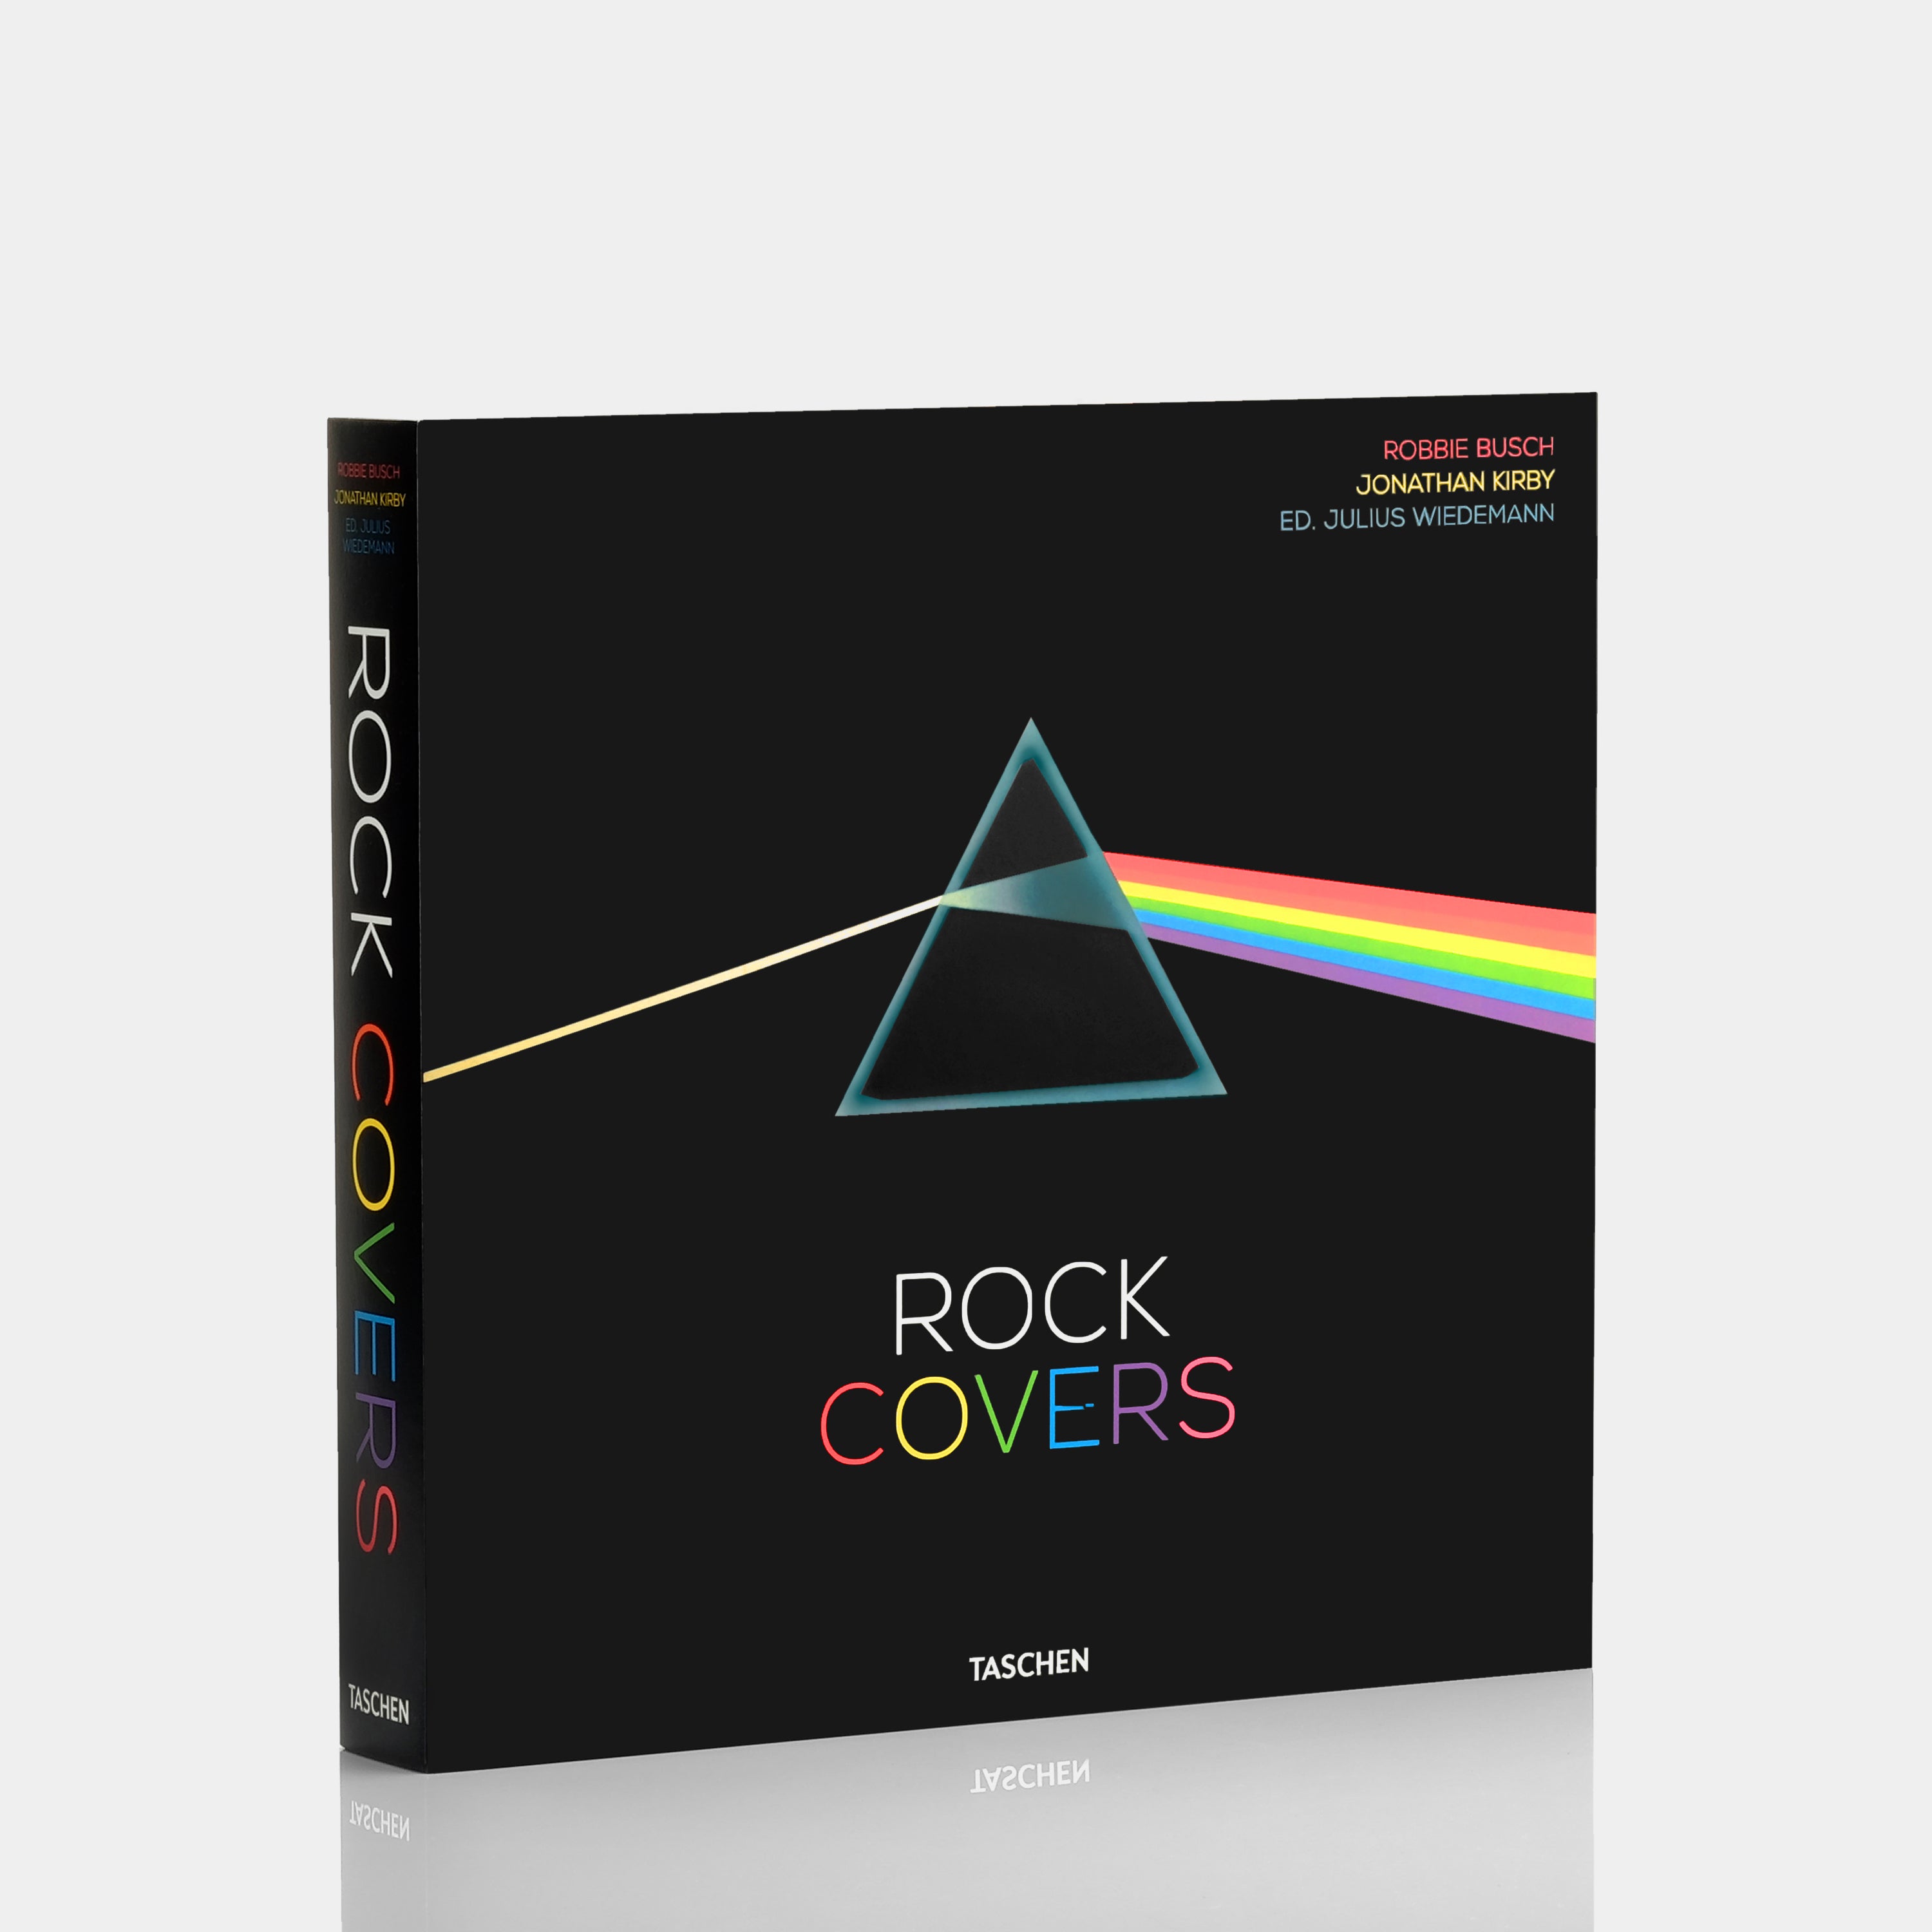 Rock Covers by Robbie Busch and Jonathan Kirby Taschen Book